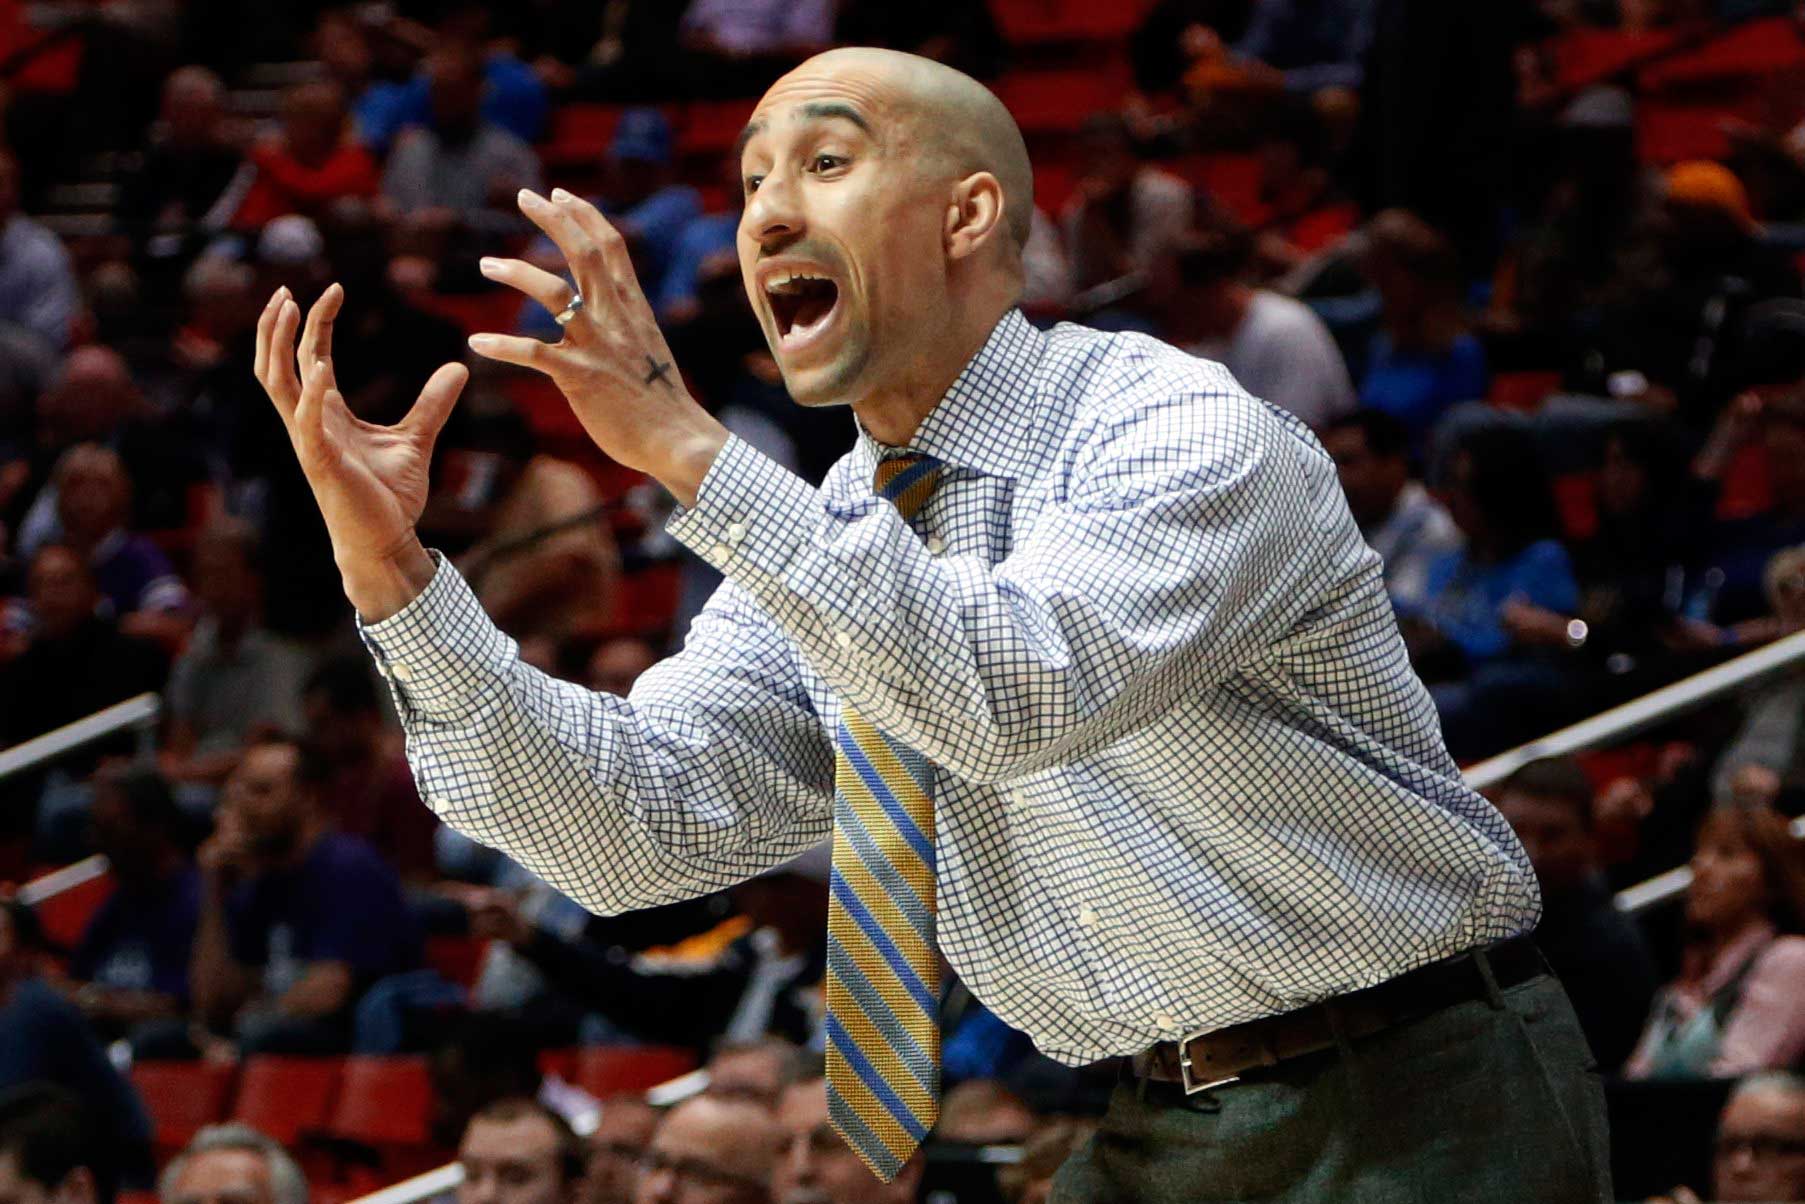 Virginia Commonwealth head coach Shaka Smart gestures as his team plays Stephen F. Austin in the first half of a second-round game in the NCAA college basketball tournament in San Diego, March 21, 2014.